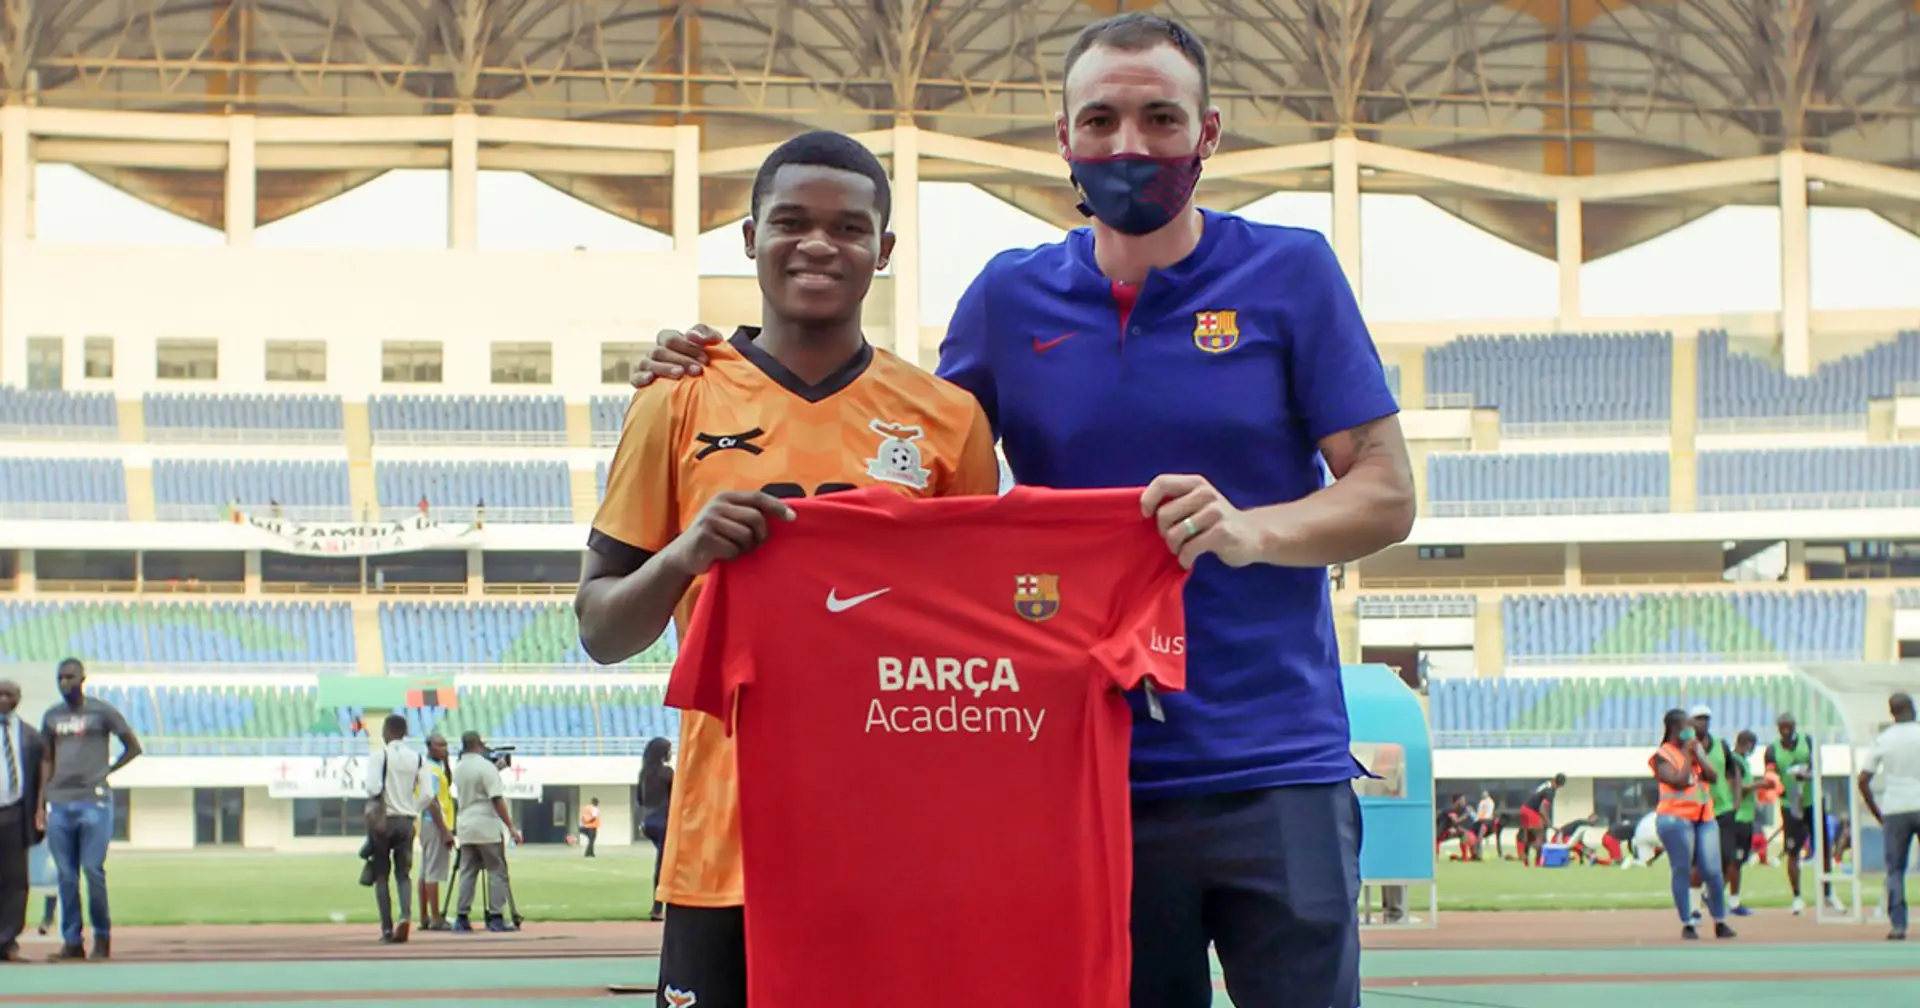 Exceptional: 14-year-old Lusaka's Barca academy player Joseph Banda Sabobo called up to play for Zambia's senior side